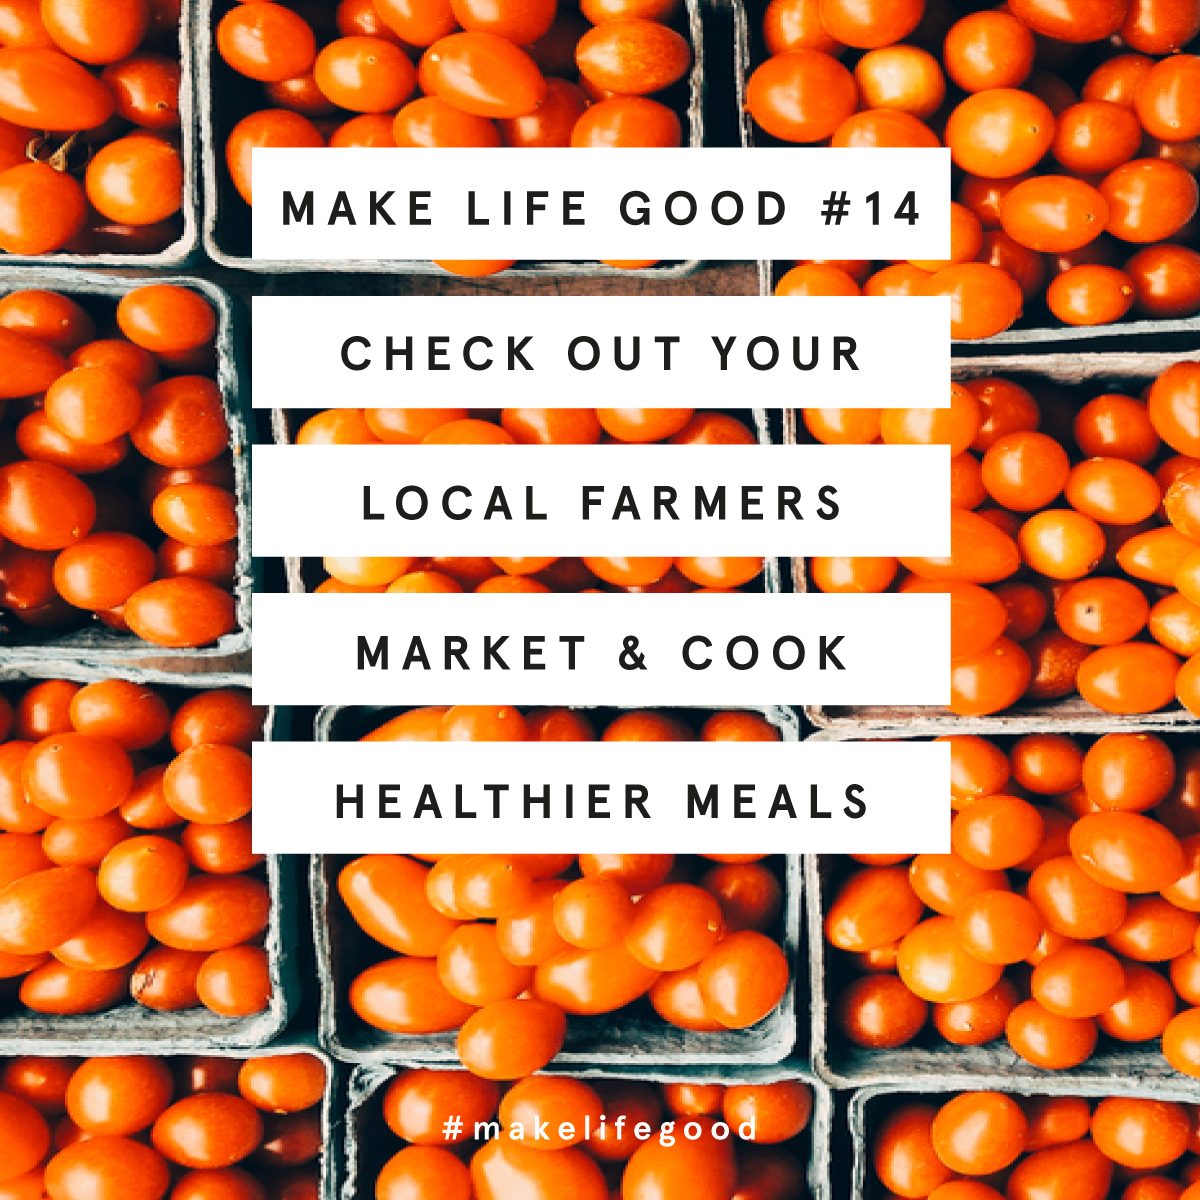 Make Life Good #14: Check out your local farmers market and cook some healthier meals